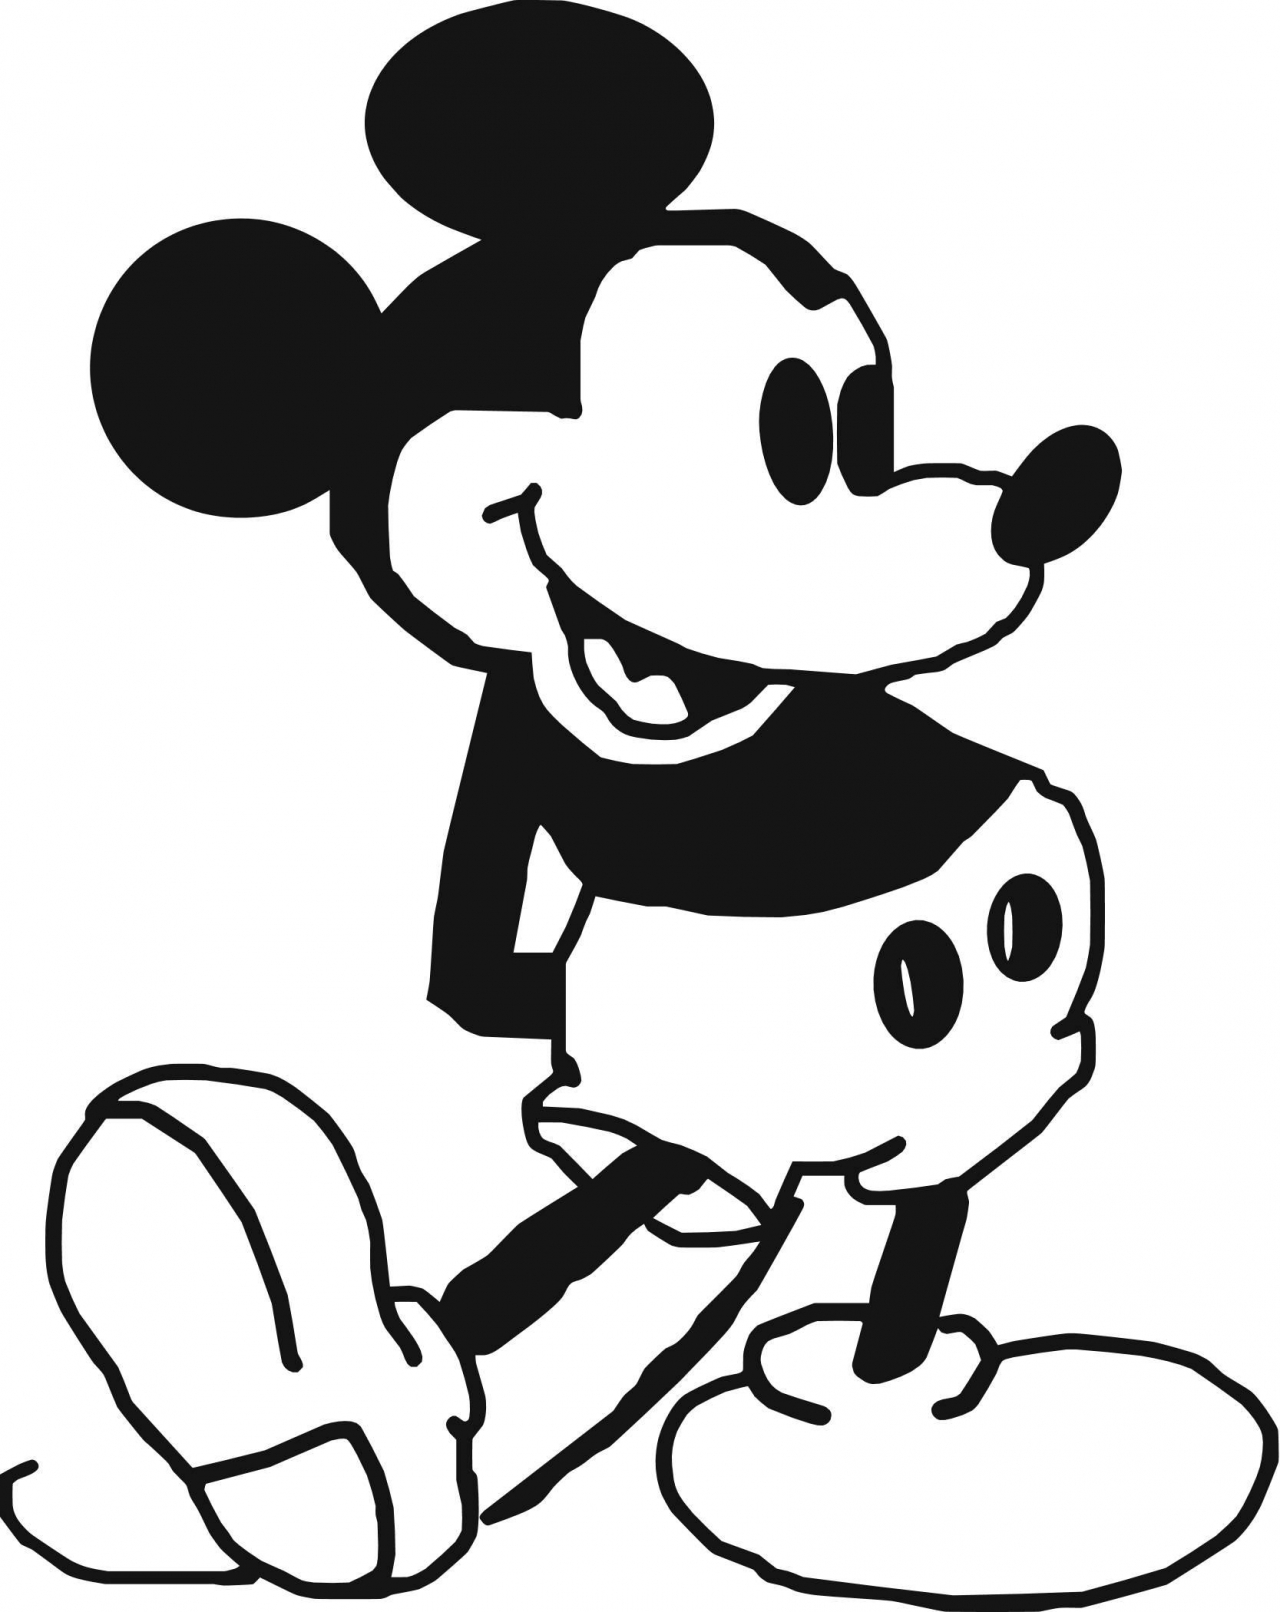 Mickey mouse 1 mickey mouse cartoon stickers vinyls decals - ClipArt